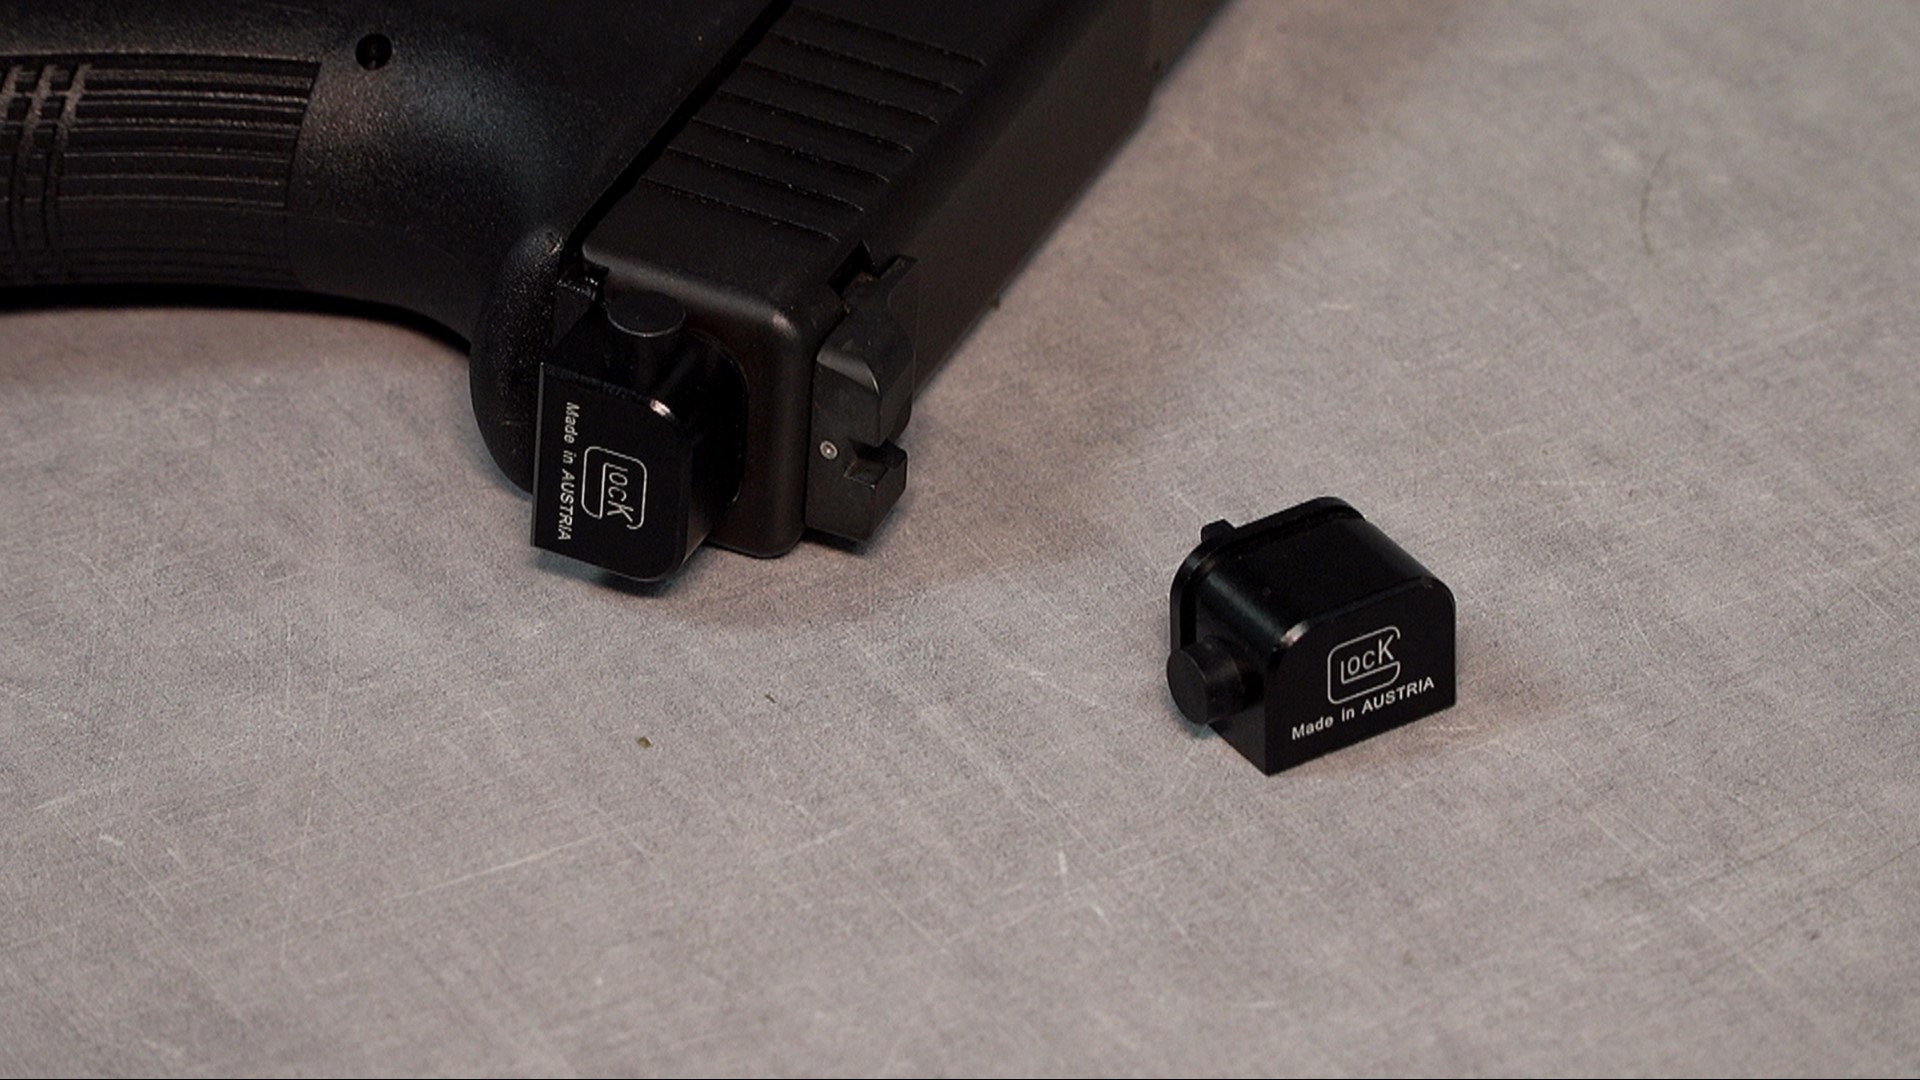 The device, most commonly called a "Glock switch", takes a gun that usually fires semiautomatic and allows it to fire about 30 rounds in two seconds.